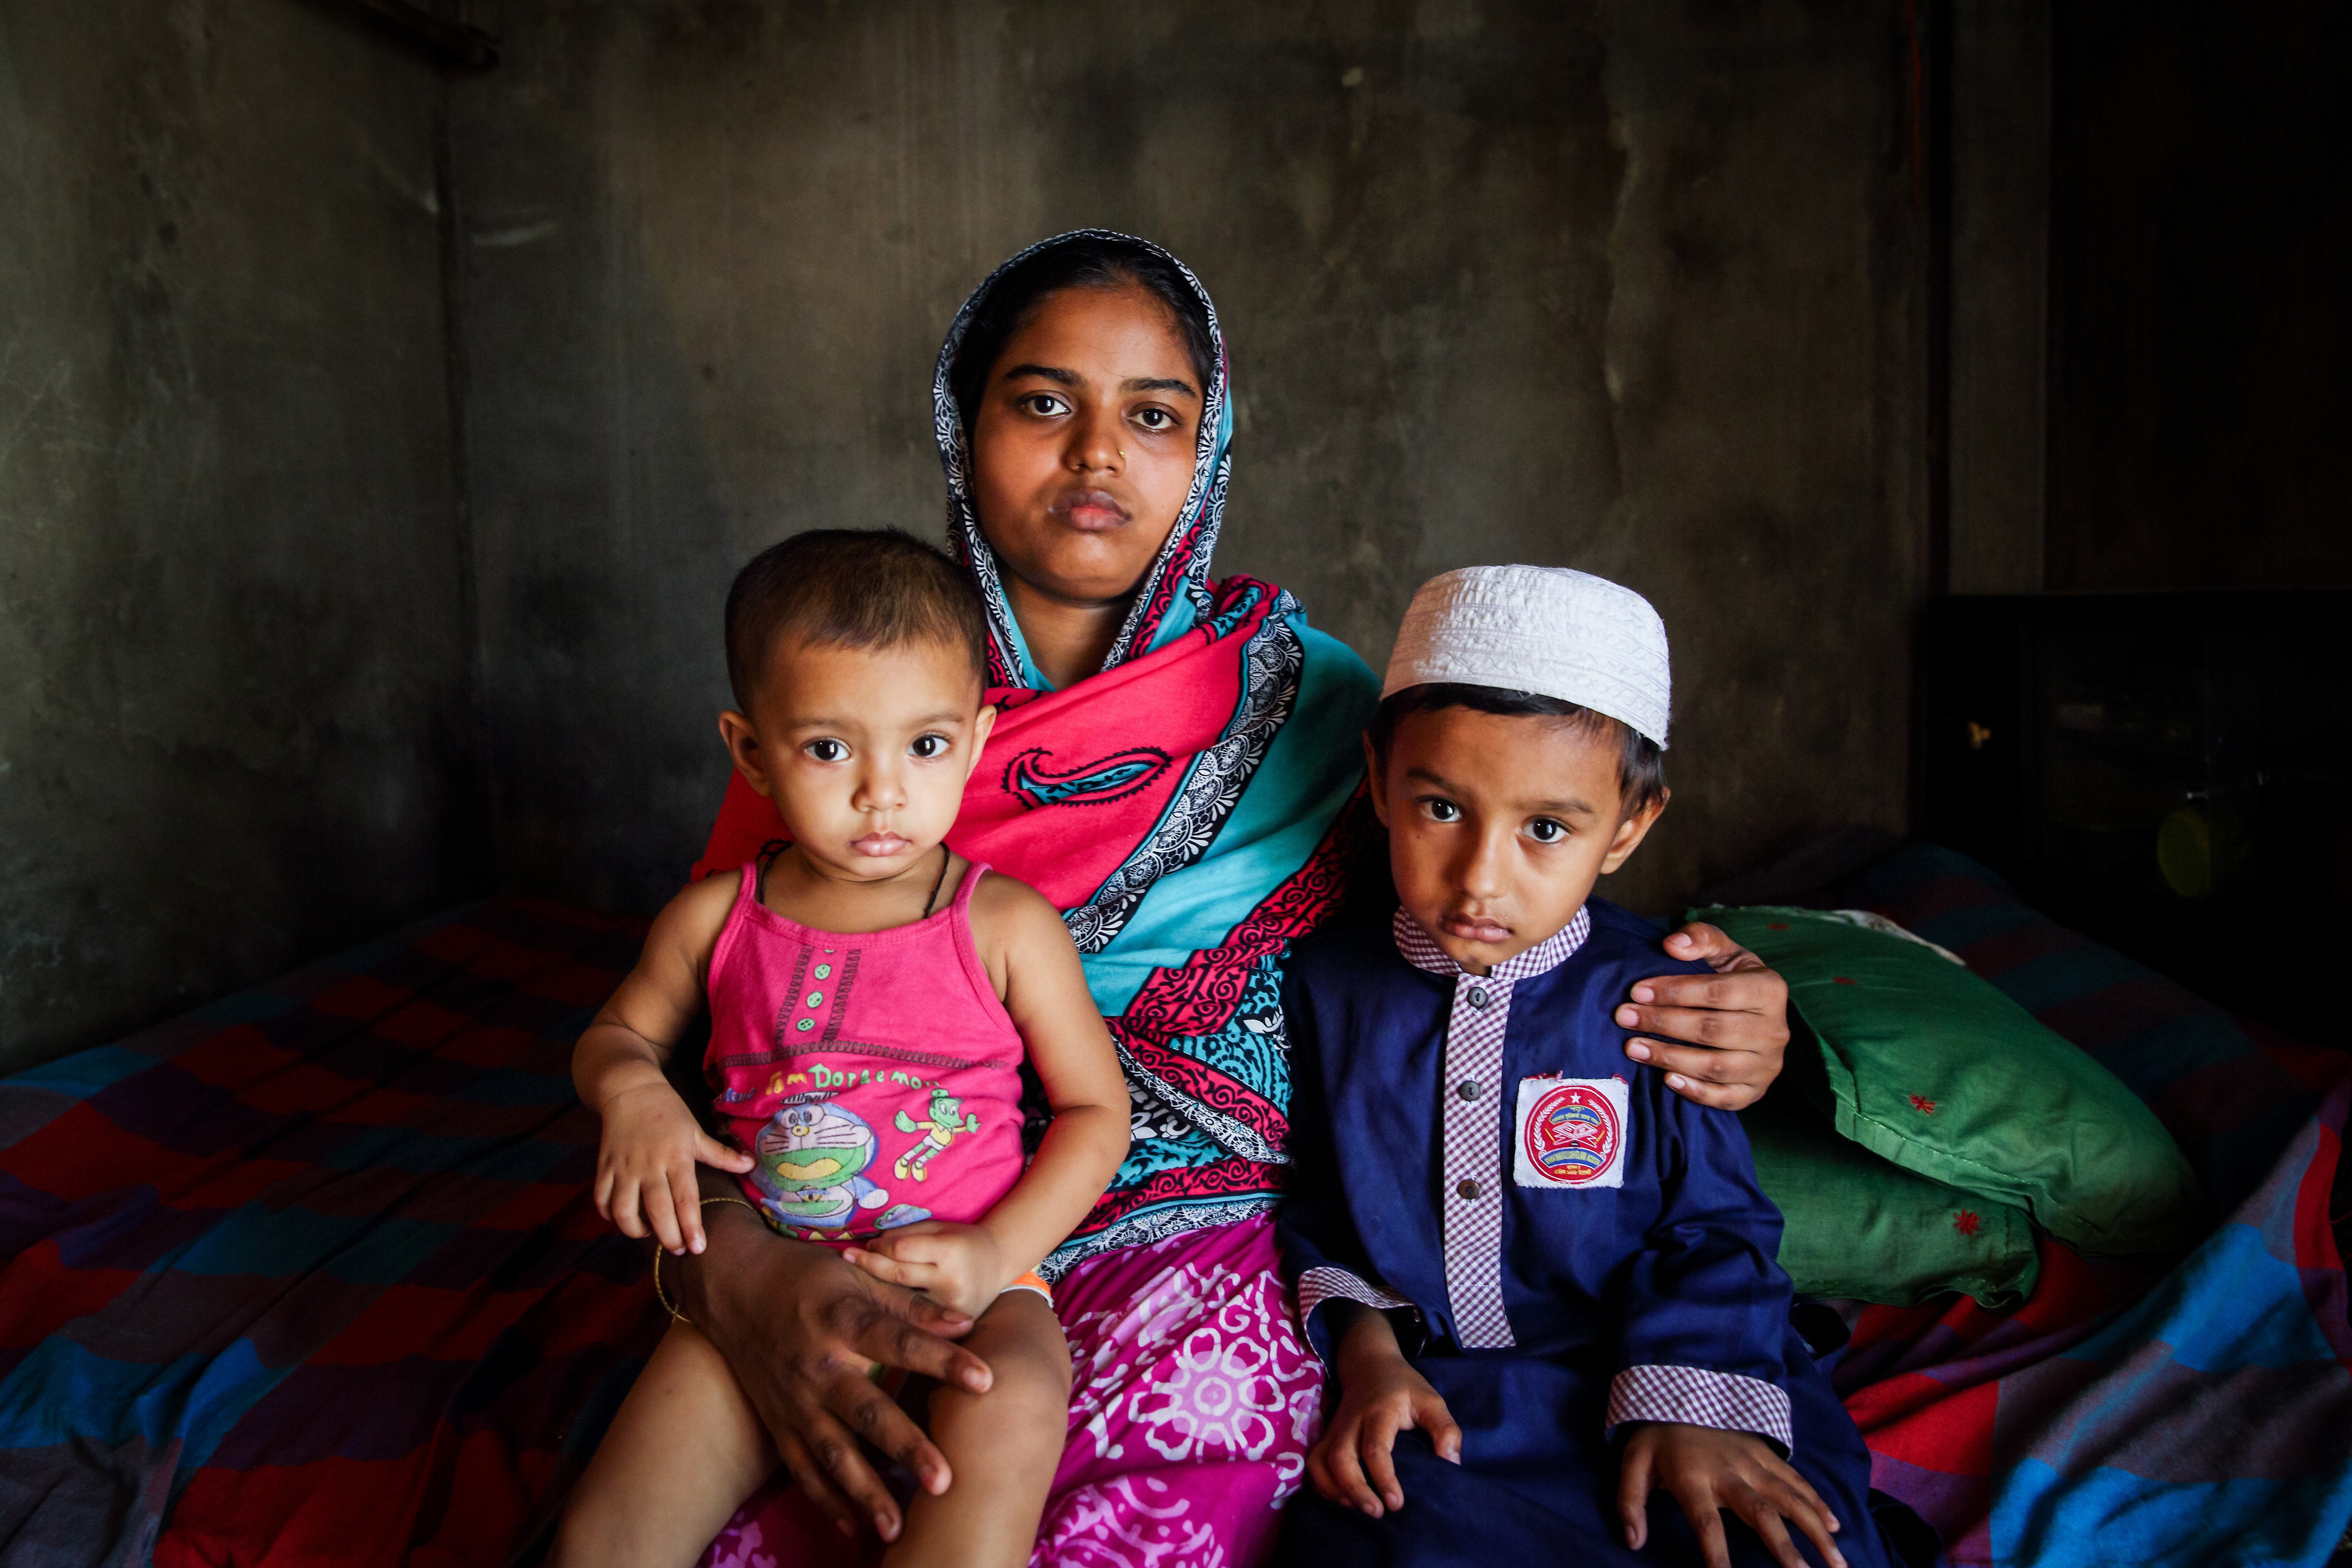 'I spend sleepless nights worrying about the children getting sick. The treatment is so expensive. Should I buy medicine for my children, or should I buy food to feed my family?' Many families like Rasheda’s struggle with the same question.